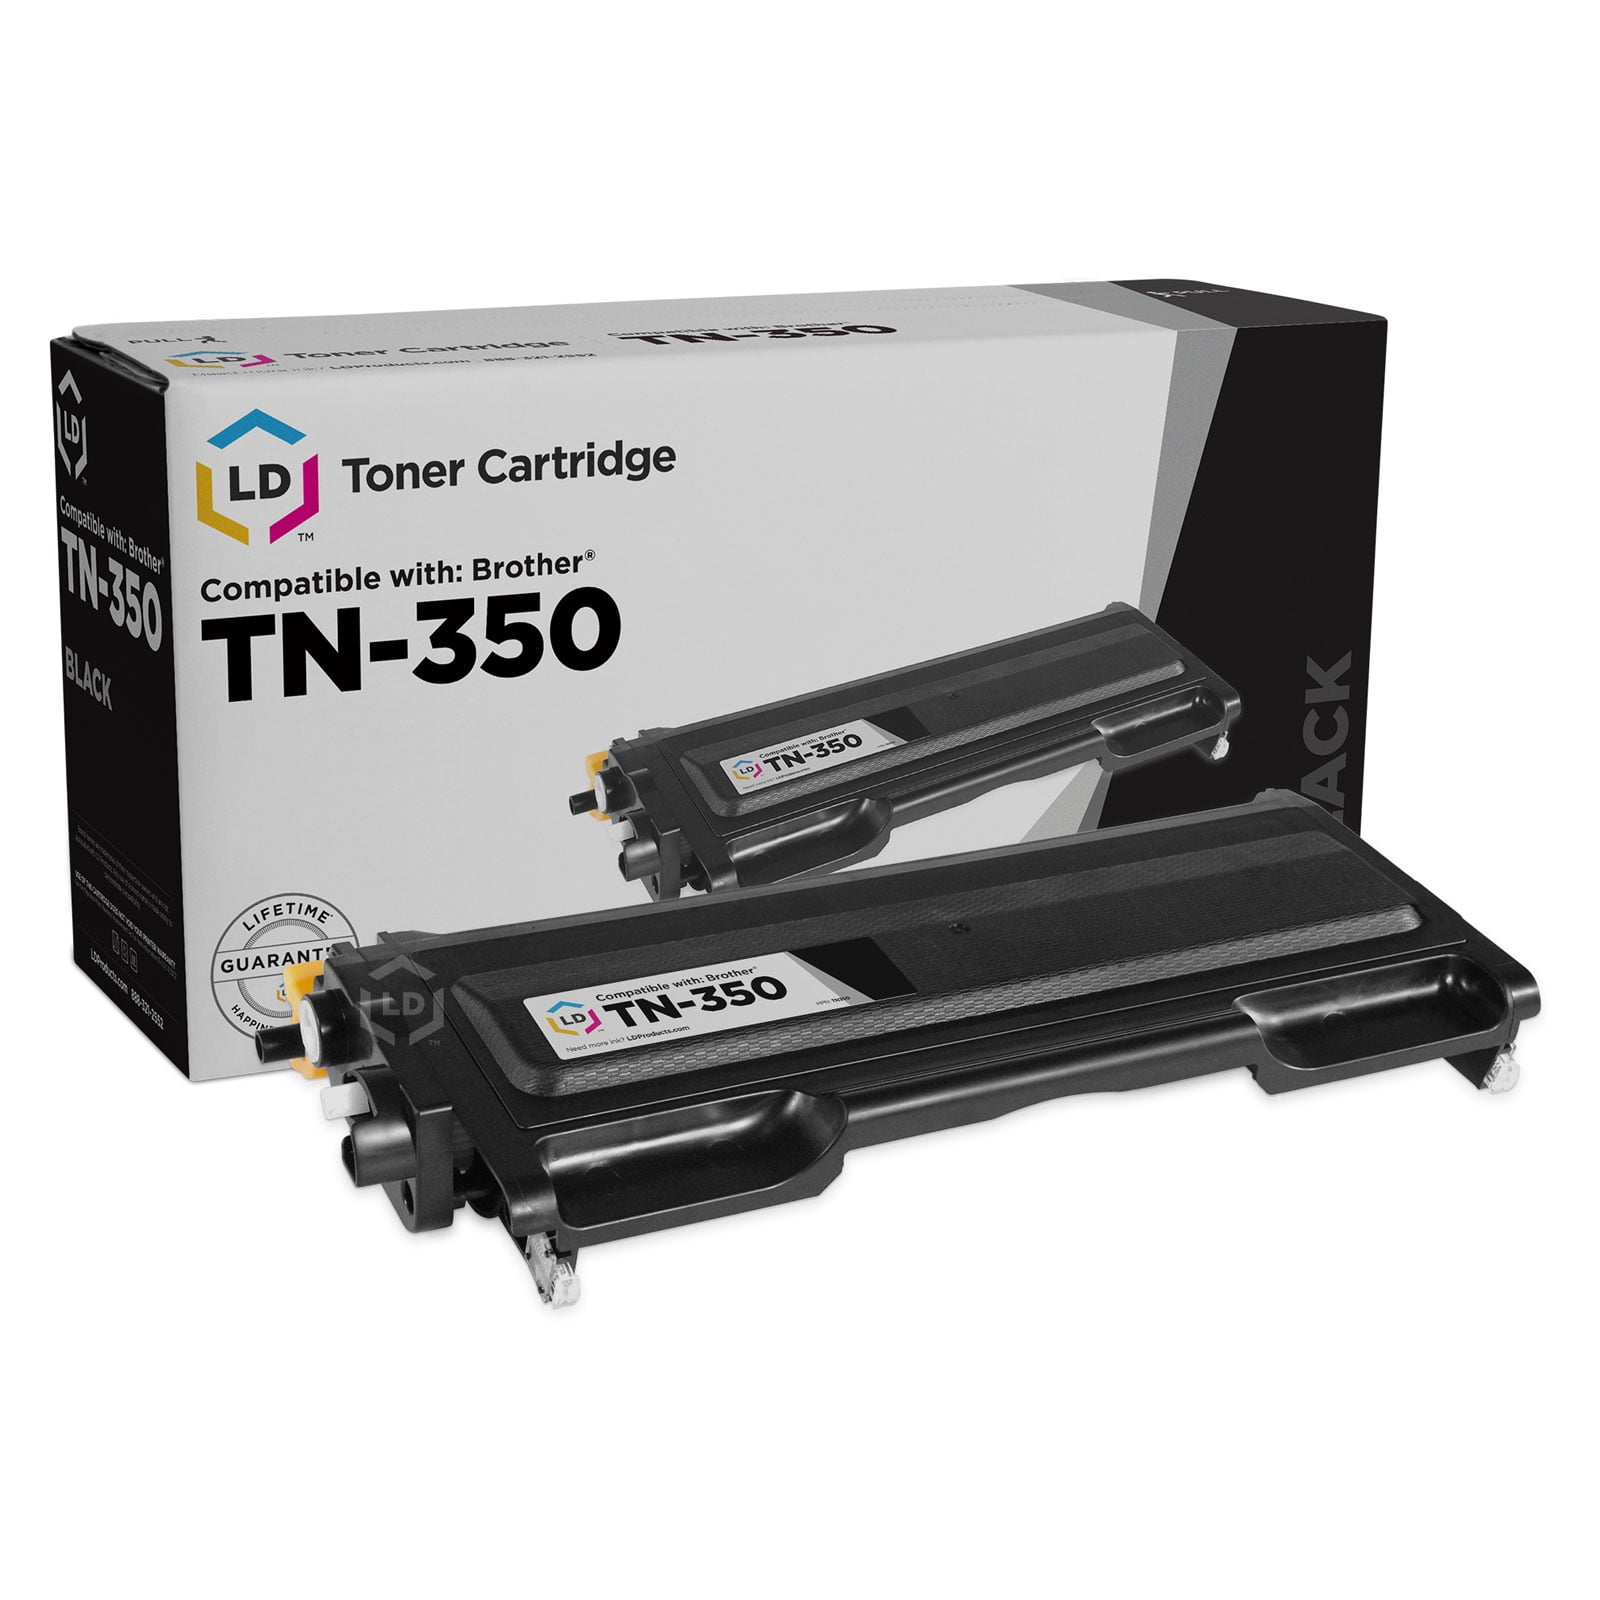 LD Compatible Replacement for TN350 Black Toner for use in DCP-7010, DCP-7020, DCP-7025, HL-2030, HL-2040, HL-2070, 2820, 2850, 2920 & MFC-7220, MFC-7420, MFC-7820D - Walmart.com